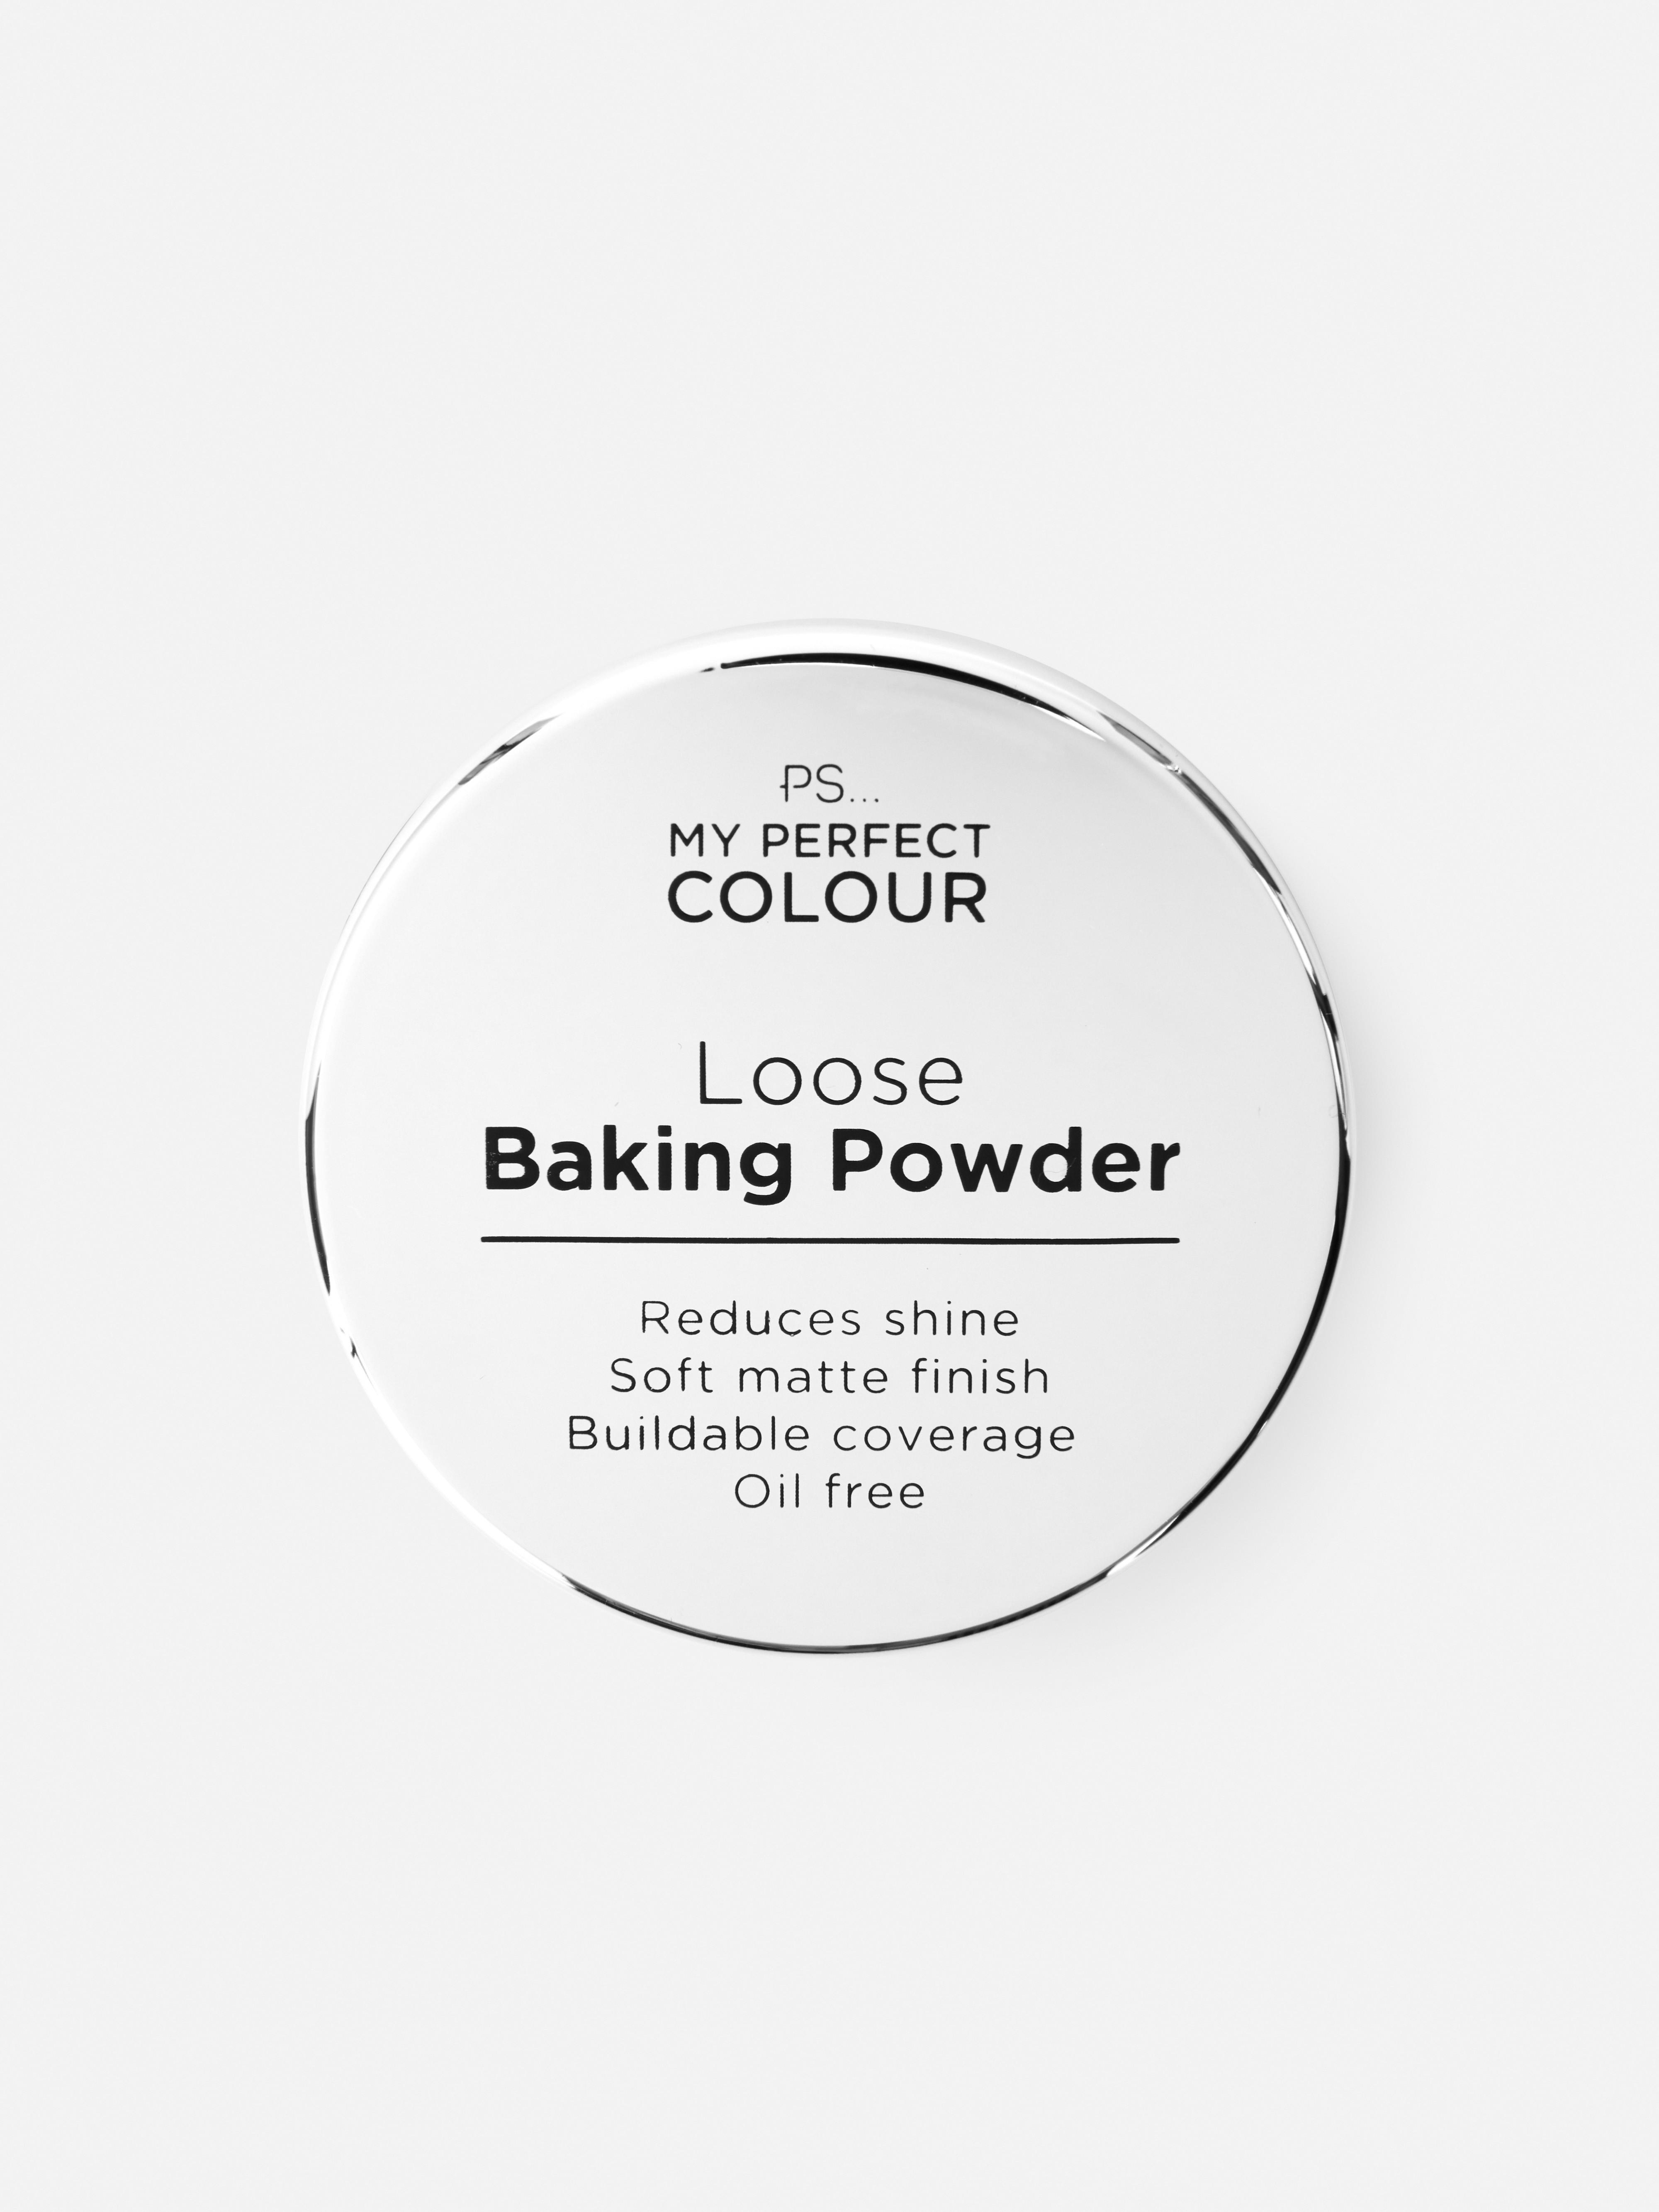 PS… My Perfect Colour Loose Baking Powder